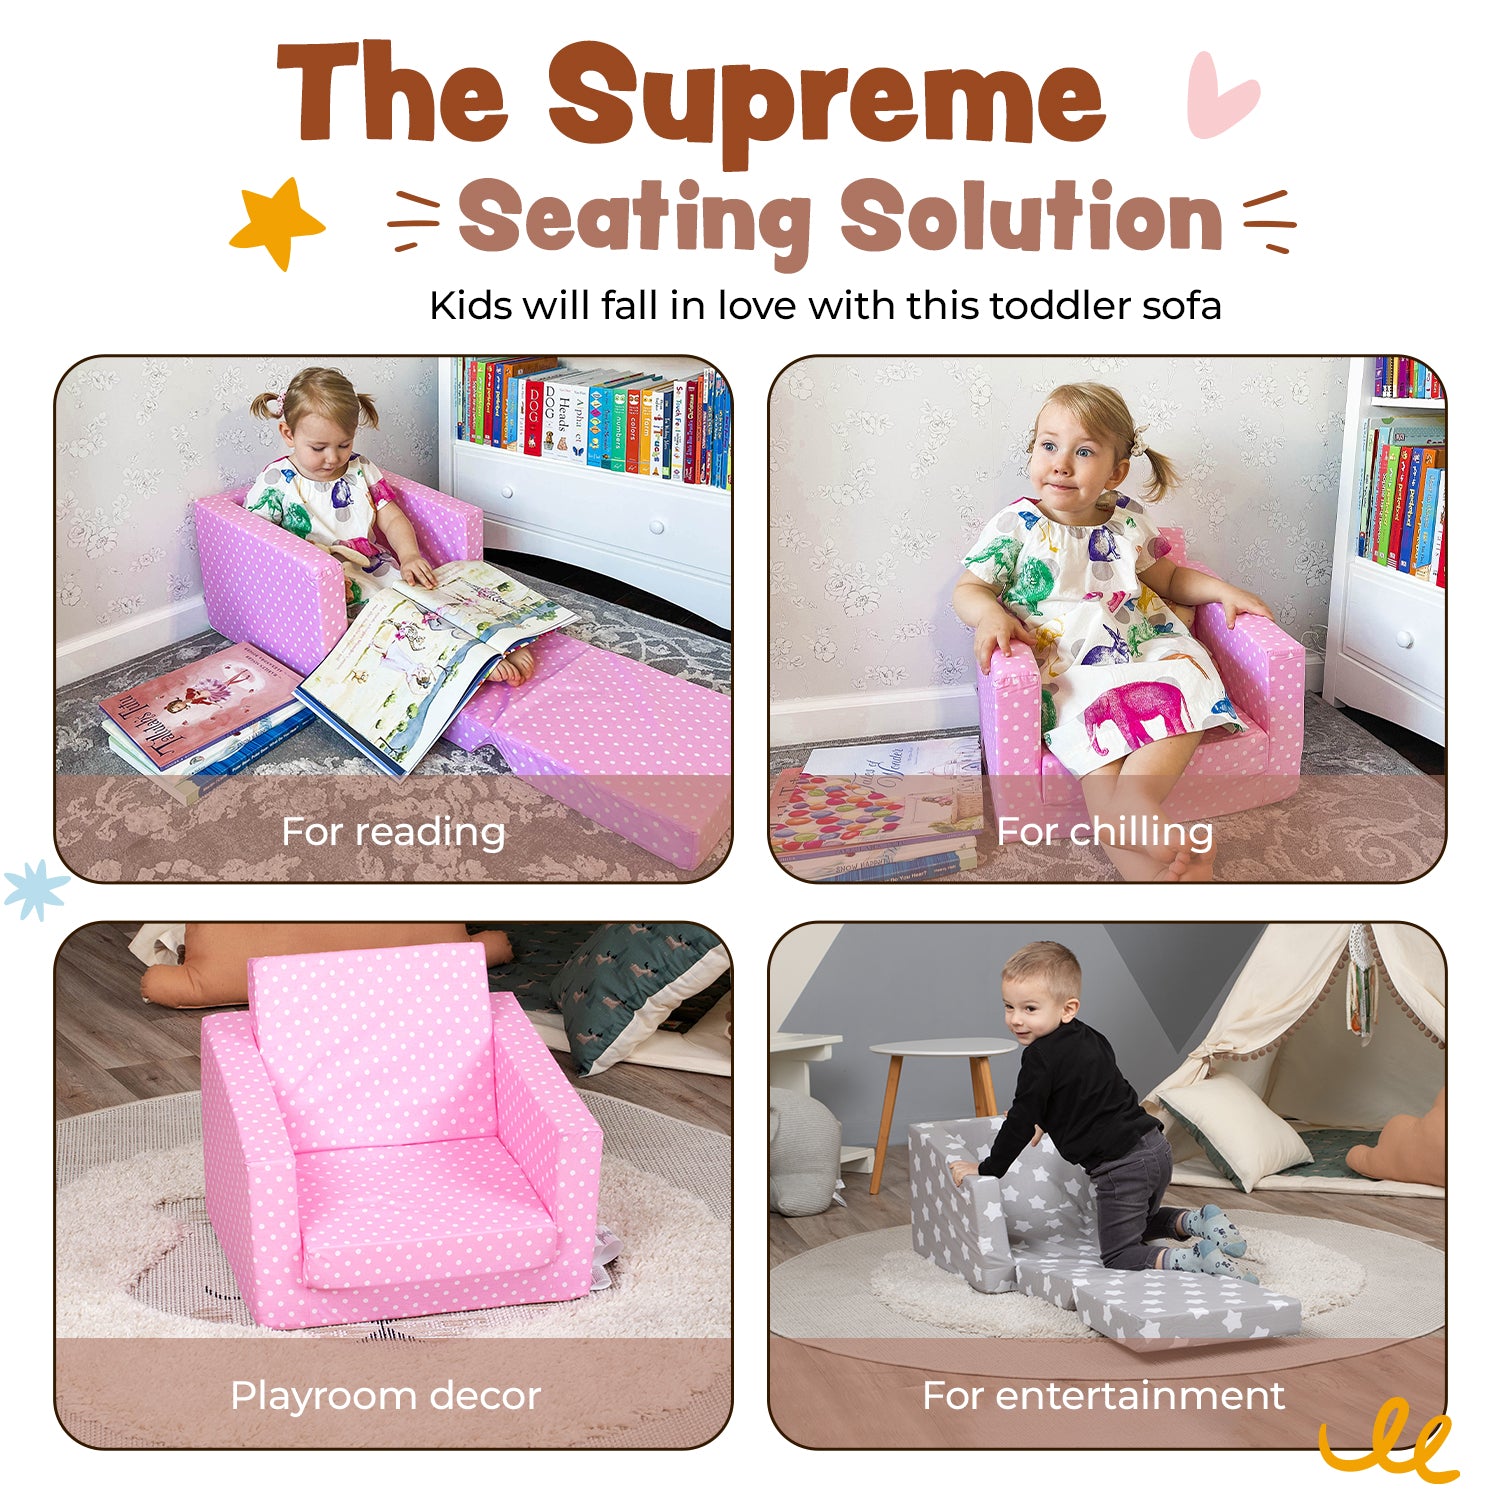 DELSIT Toddler Chair & Kids Sofa - Flip Open Foam Single Sofa - Pink with Dots